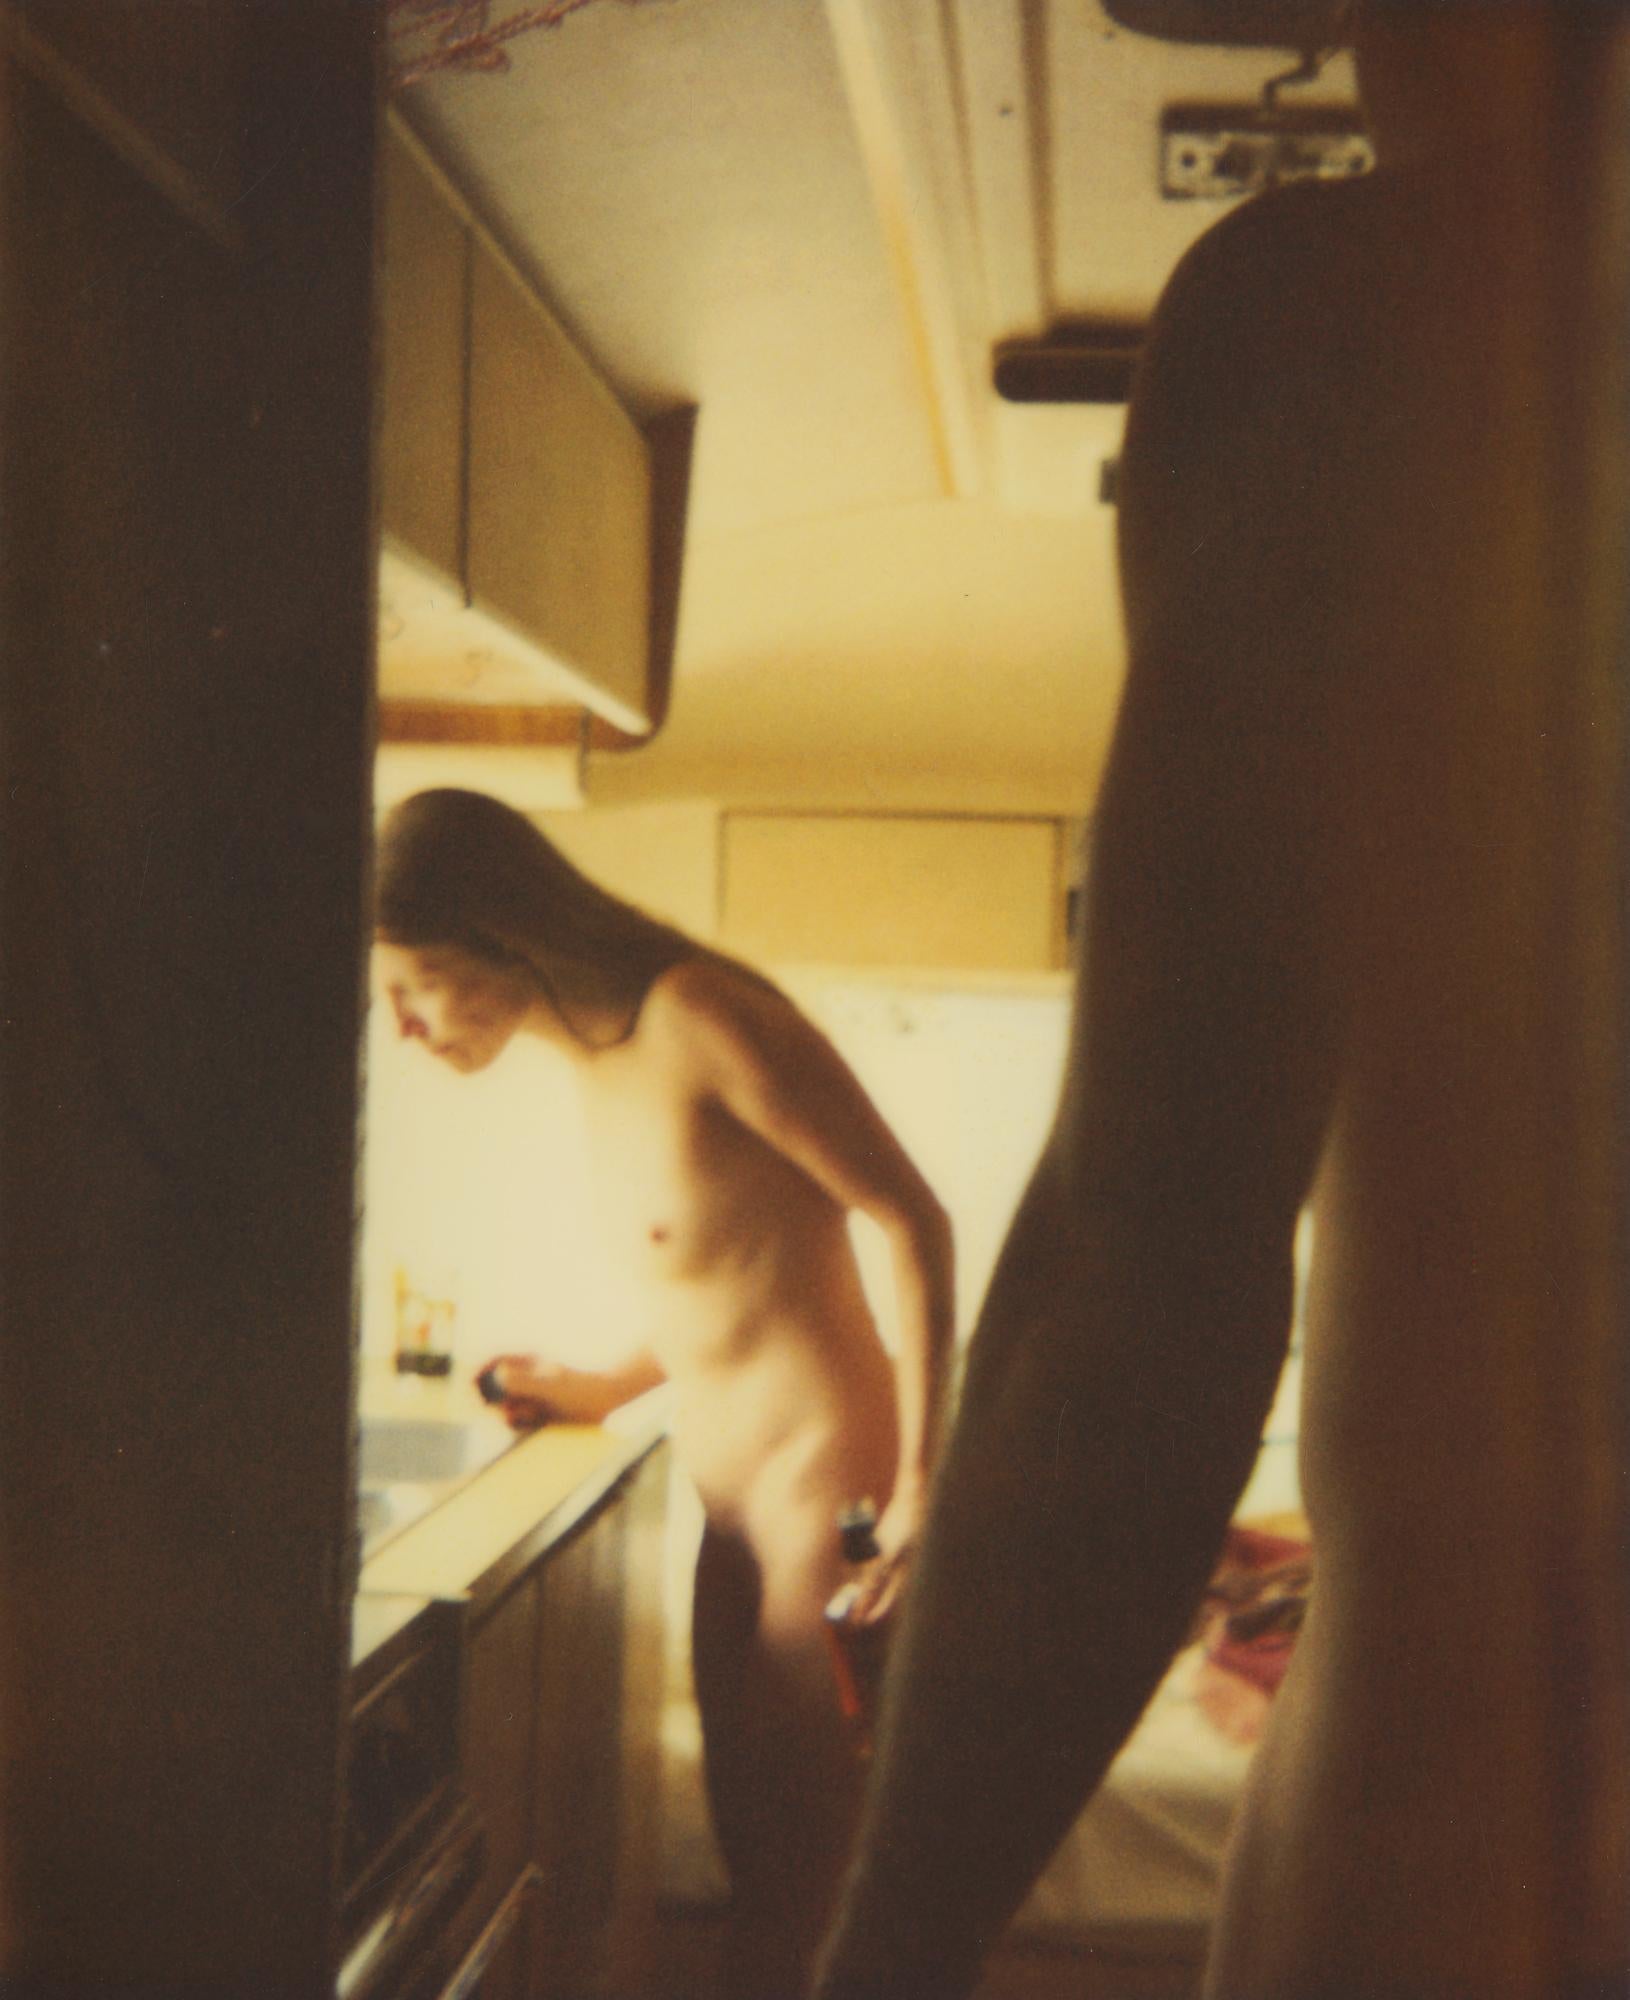 Whisky and Water VI - Sidewinder - Diptych, Polaroid, Nude, 21st Century, Color - Contemporary Photograph by Stefanie Schneider